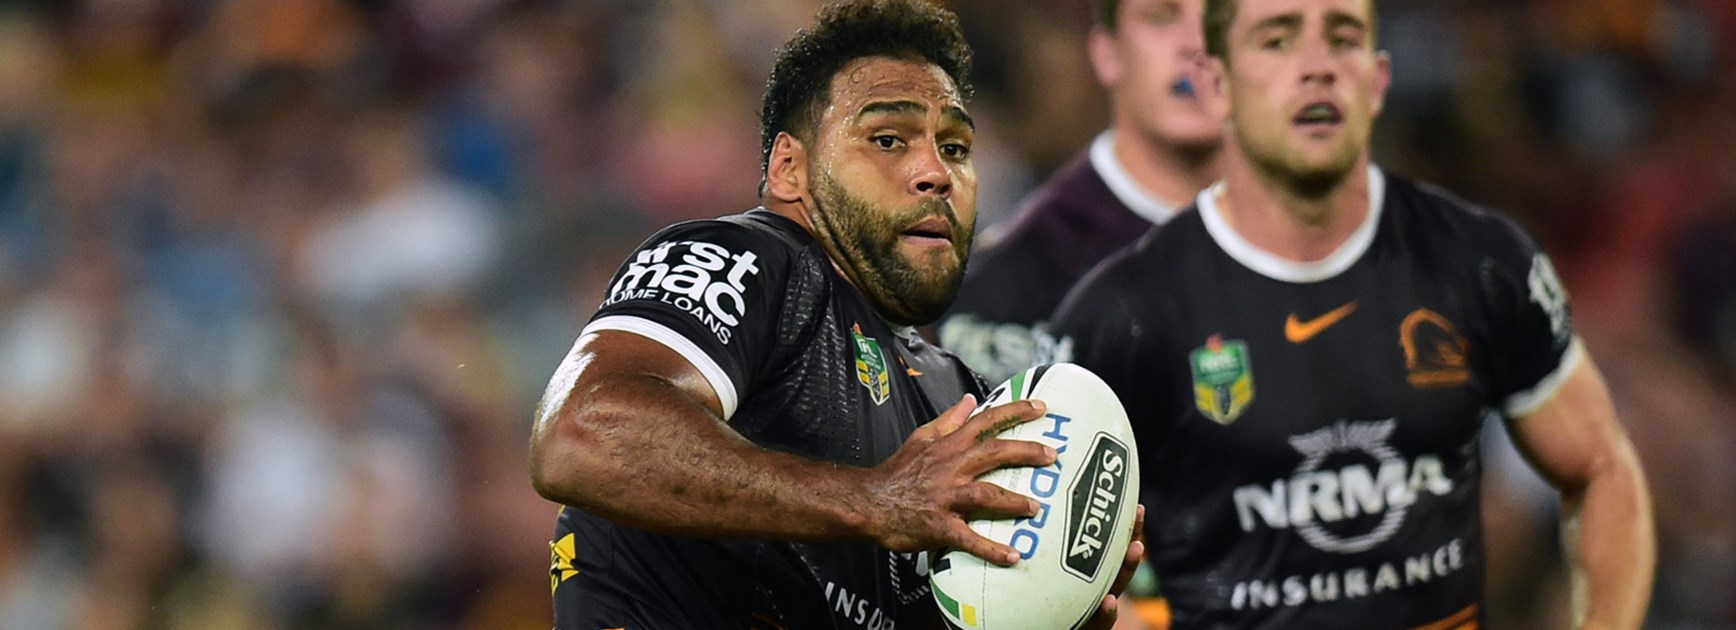 Broncos forward Sam Thaiday against the Knights in Round 7.